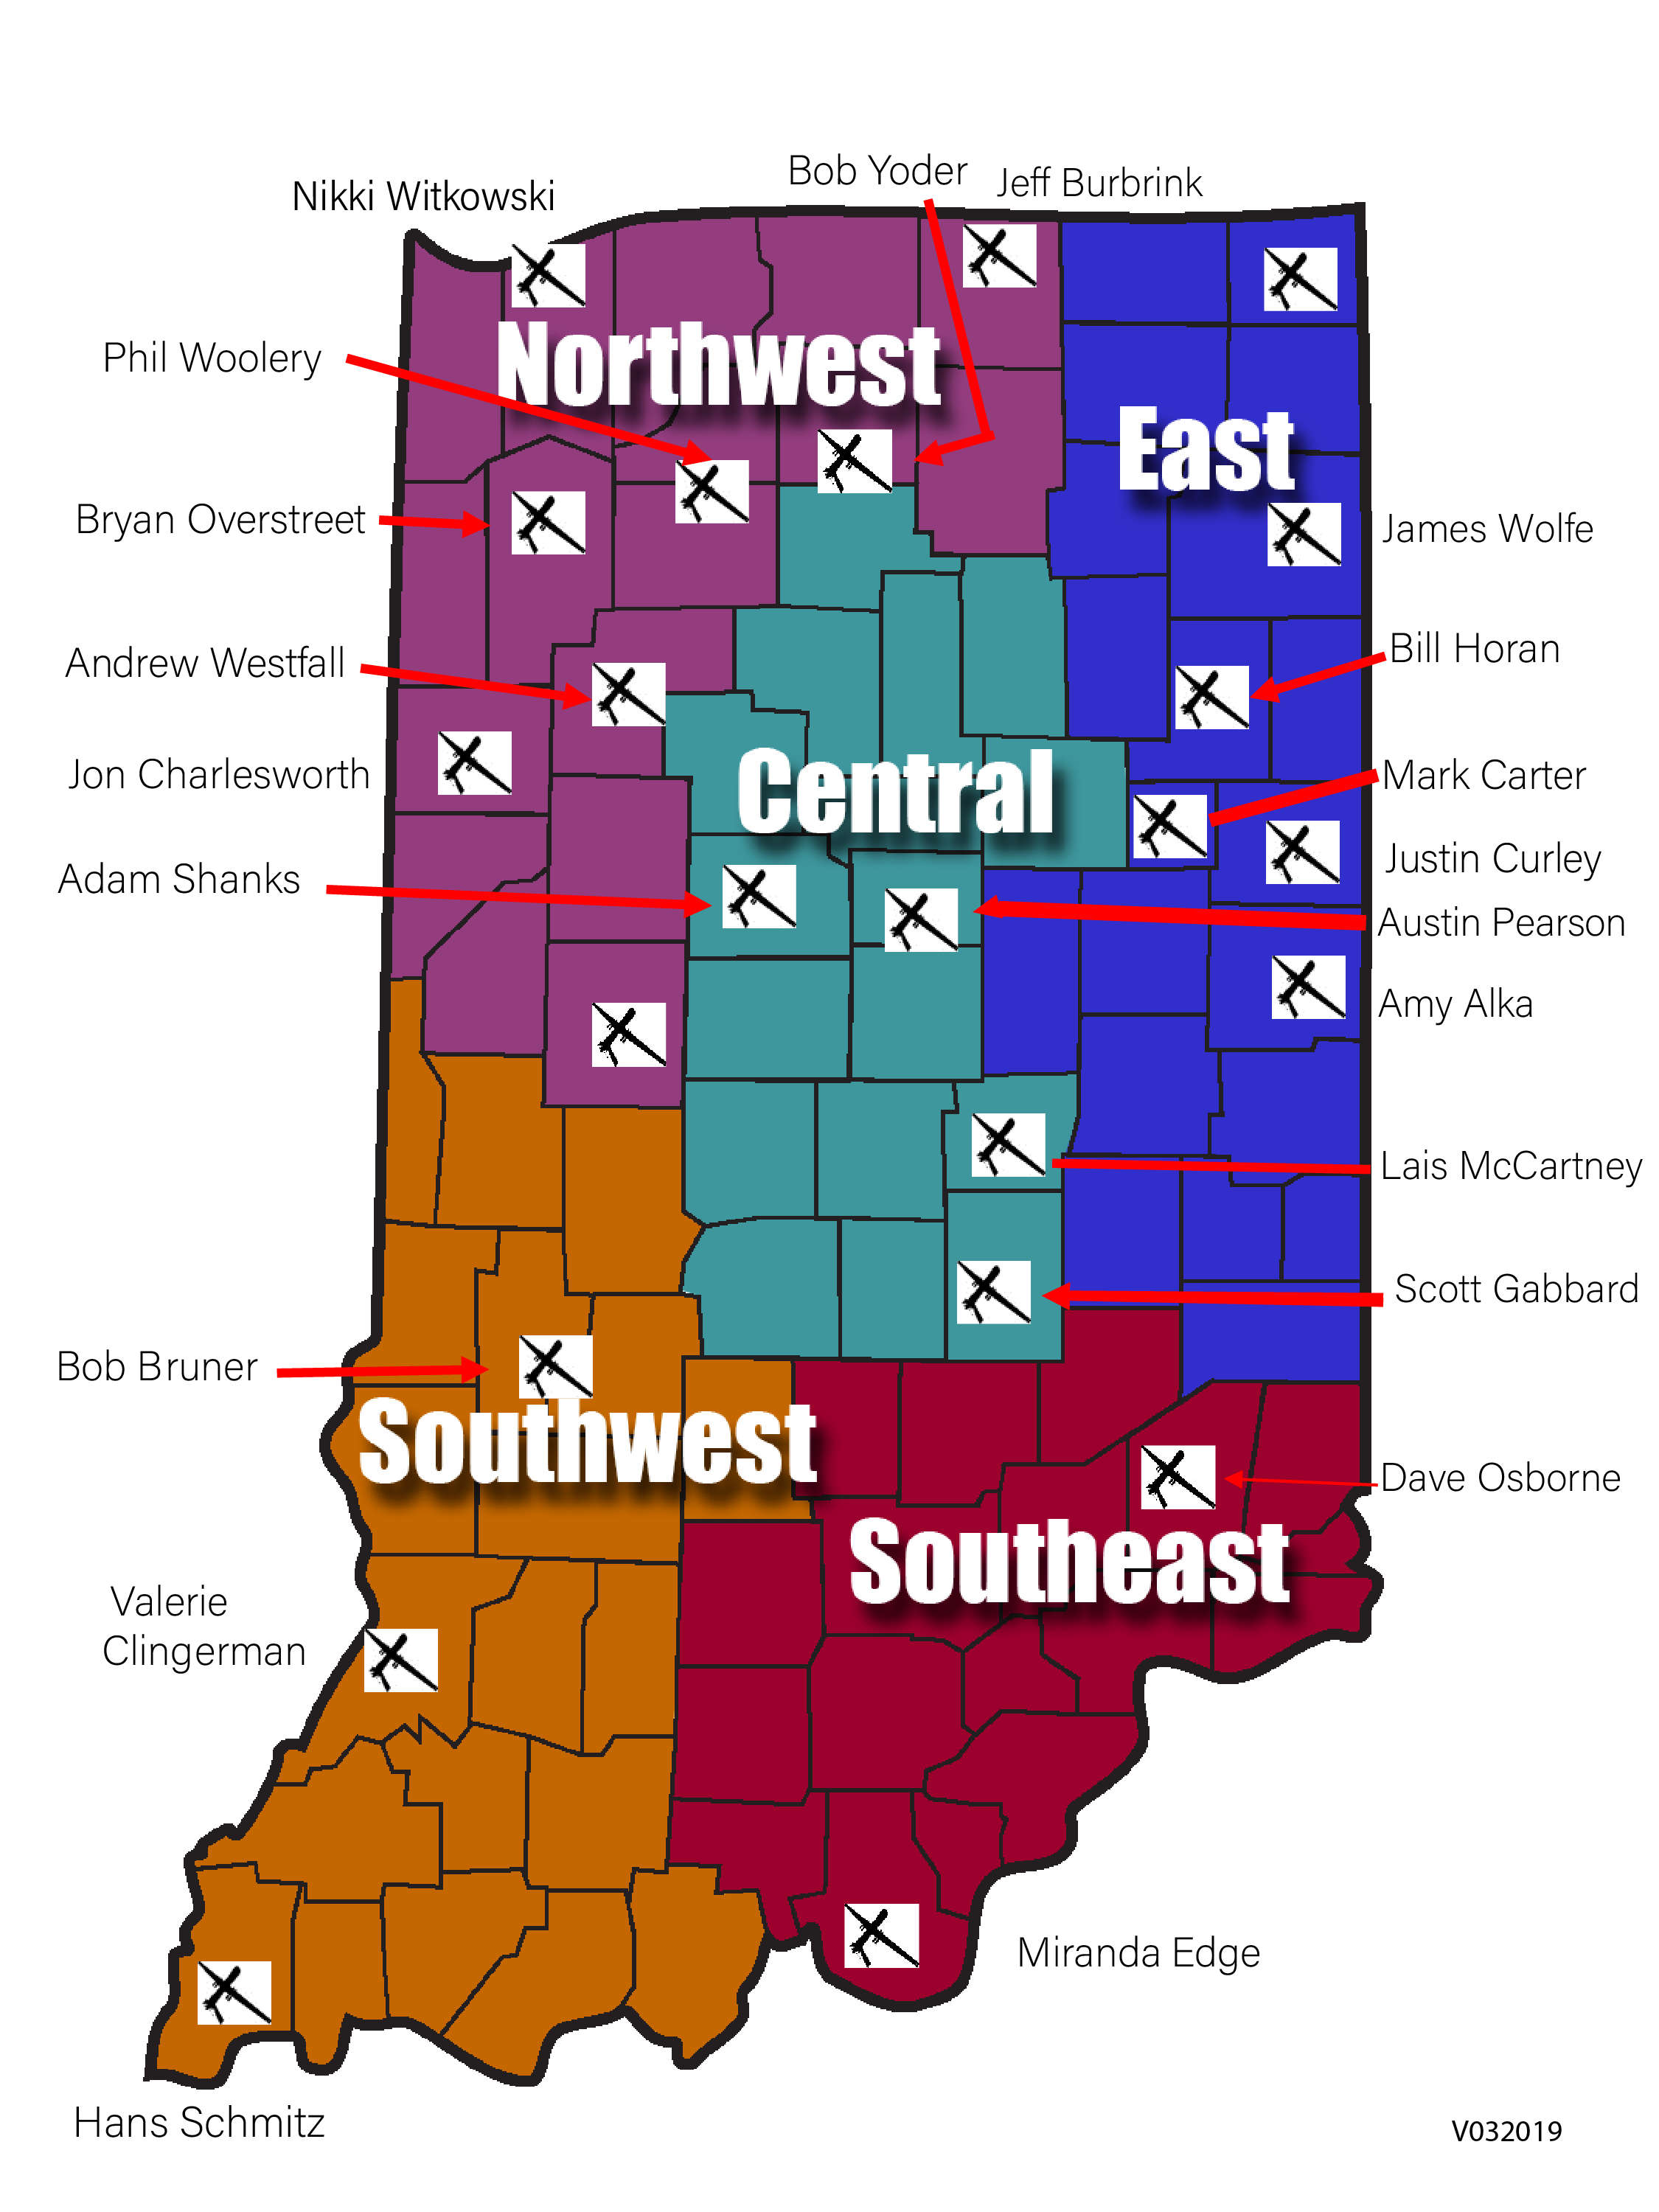 Image of a Indiana map with the locations of anr educators in drone program